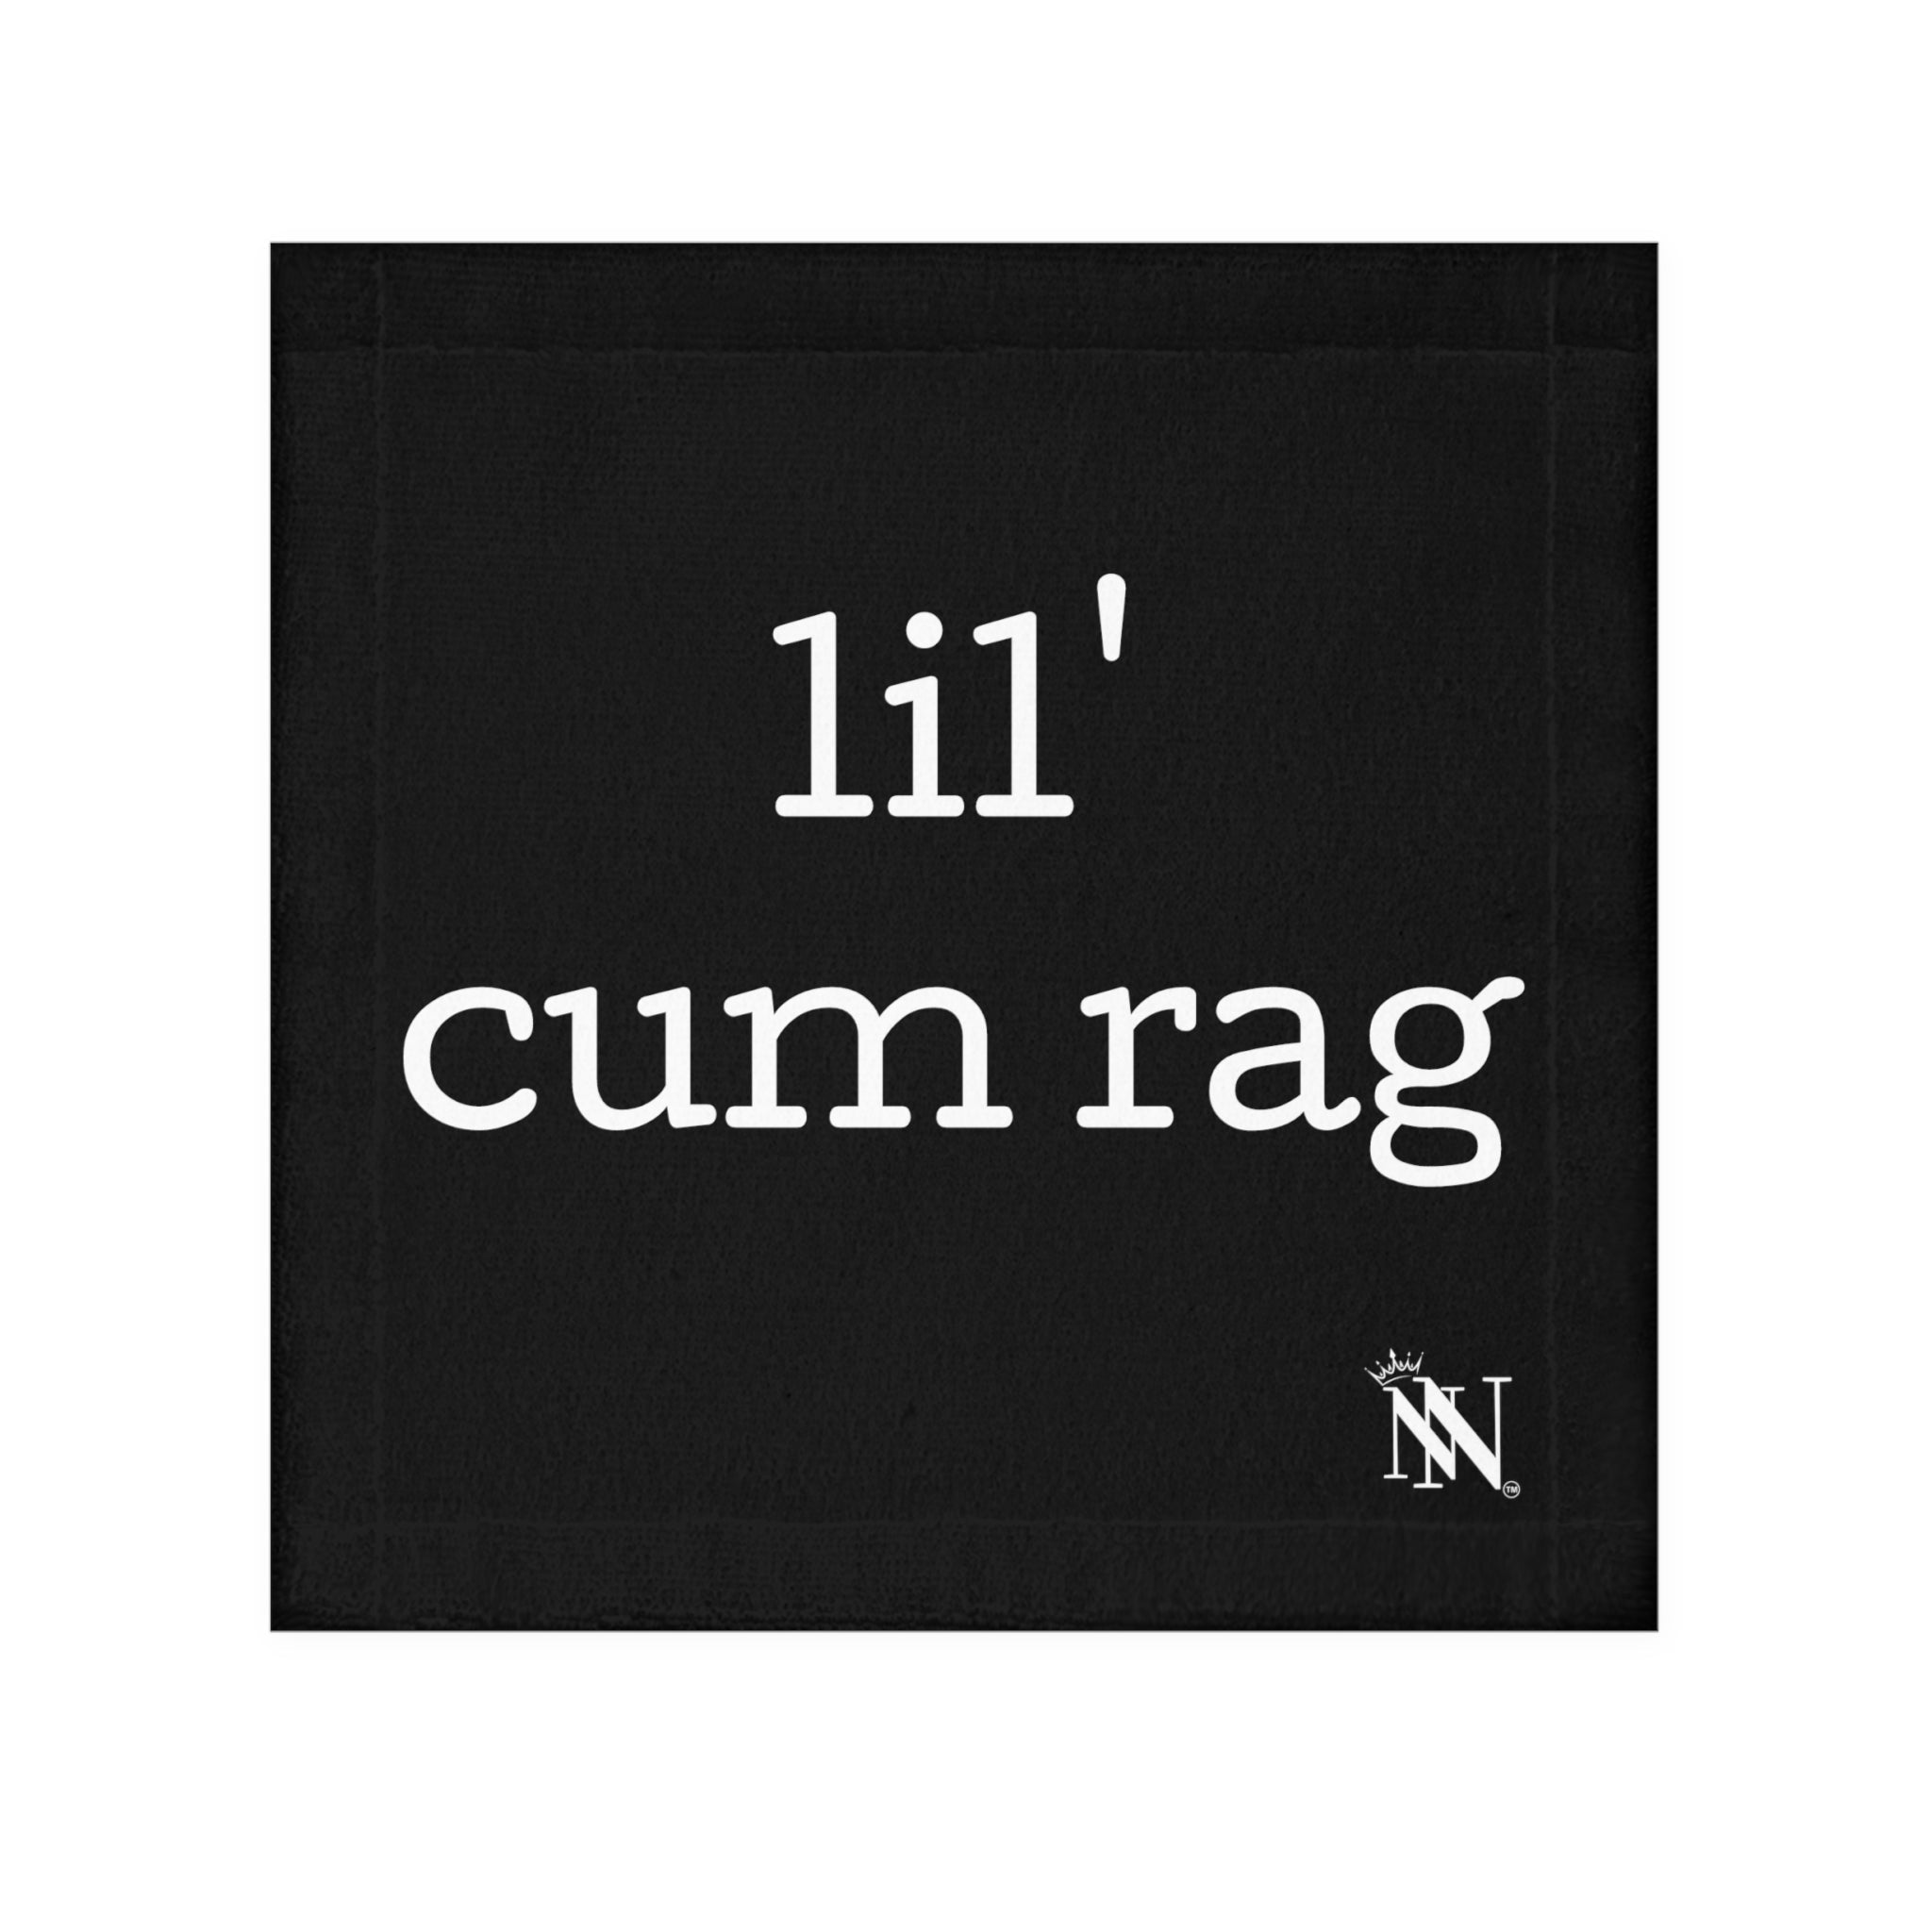 Lils' Cum Rag | Gifts for Boyfriend, Funny Towel Romantic Gift for Wedding Couple Fiance First Year Anniversary Valentines, Party Gag Gifts, Joke Humor Cloth for Husband Men BF NECTAR NAPKINS